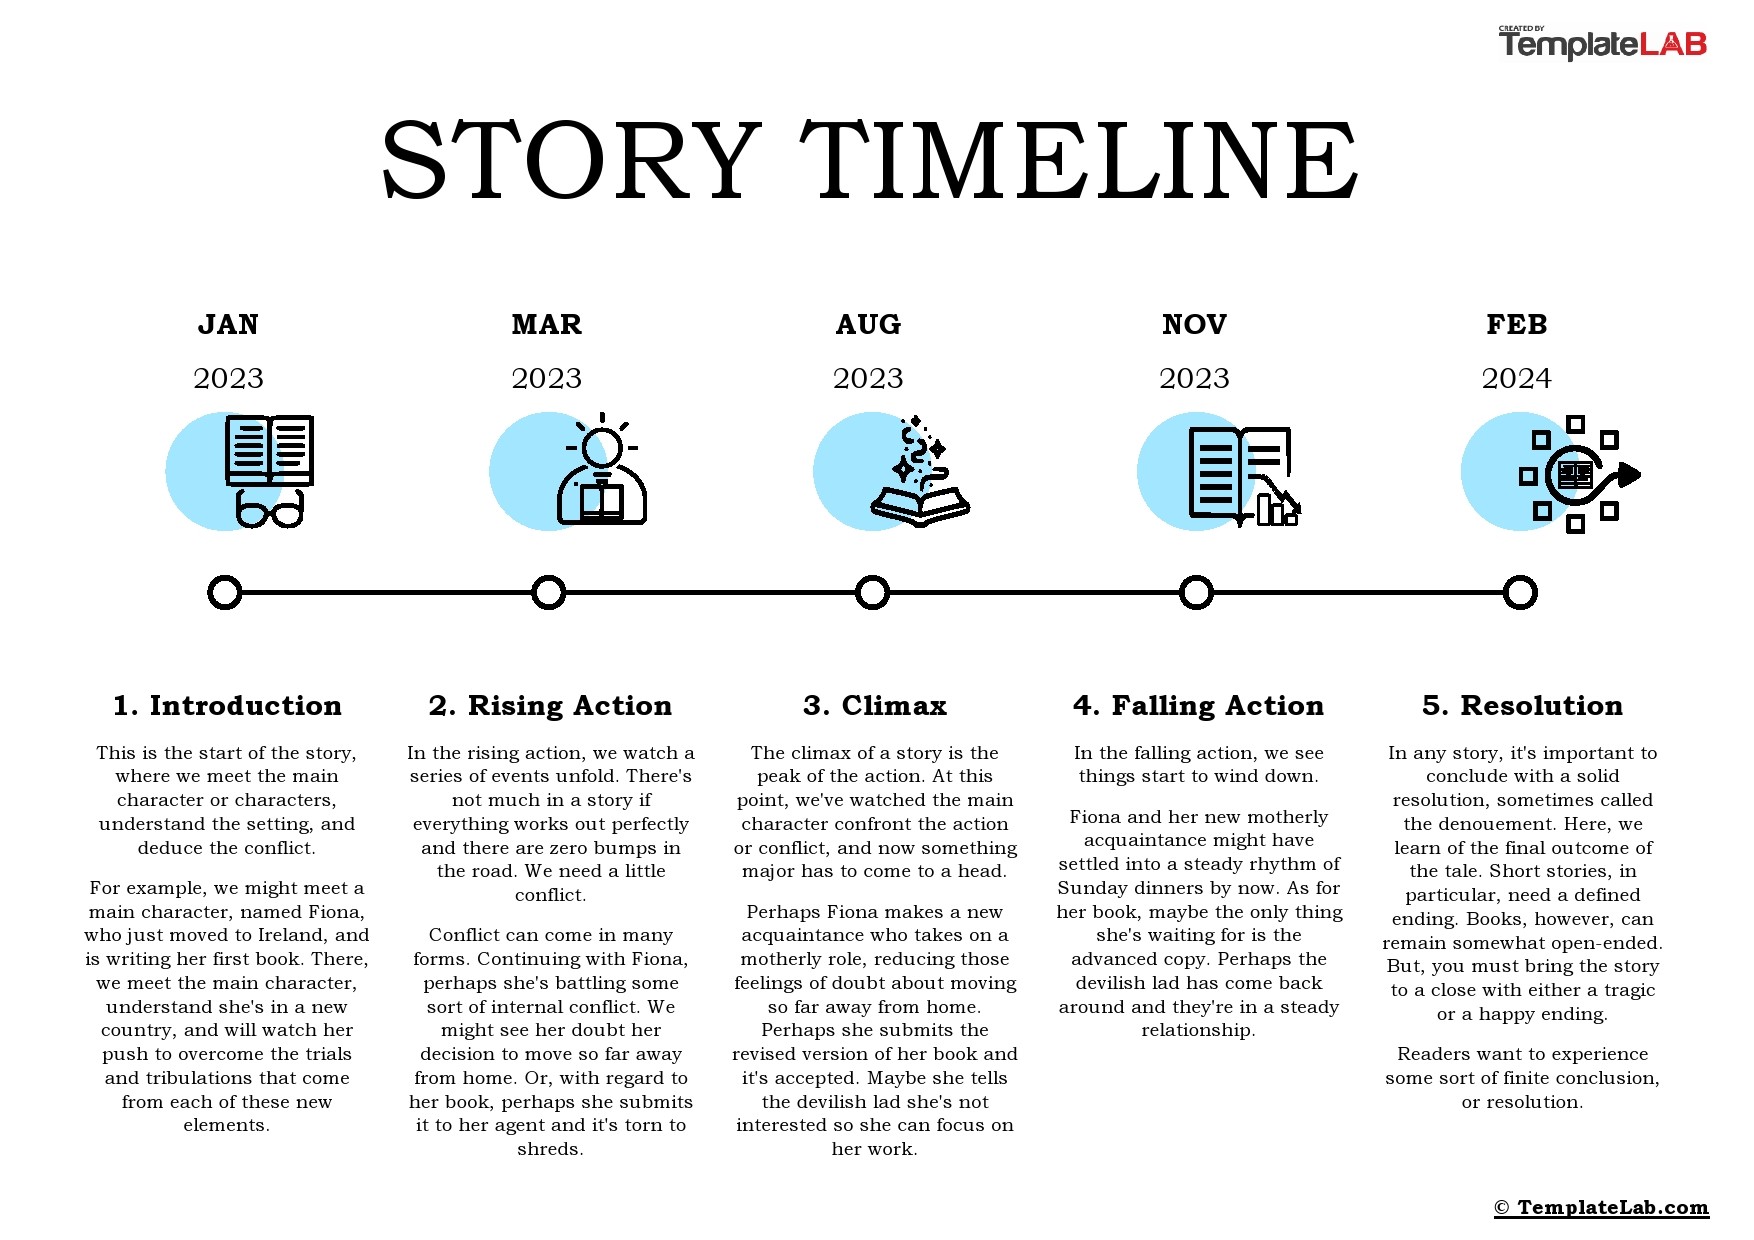 Free Story Timeline Template